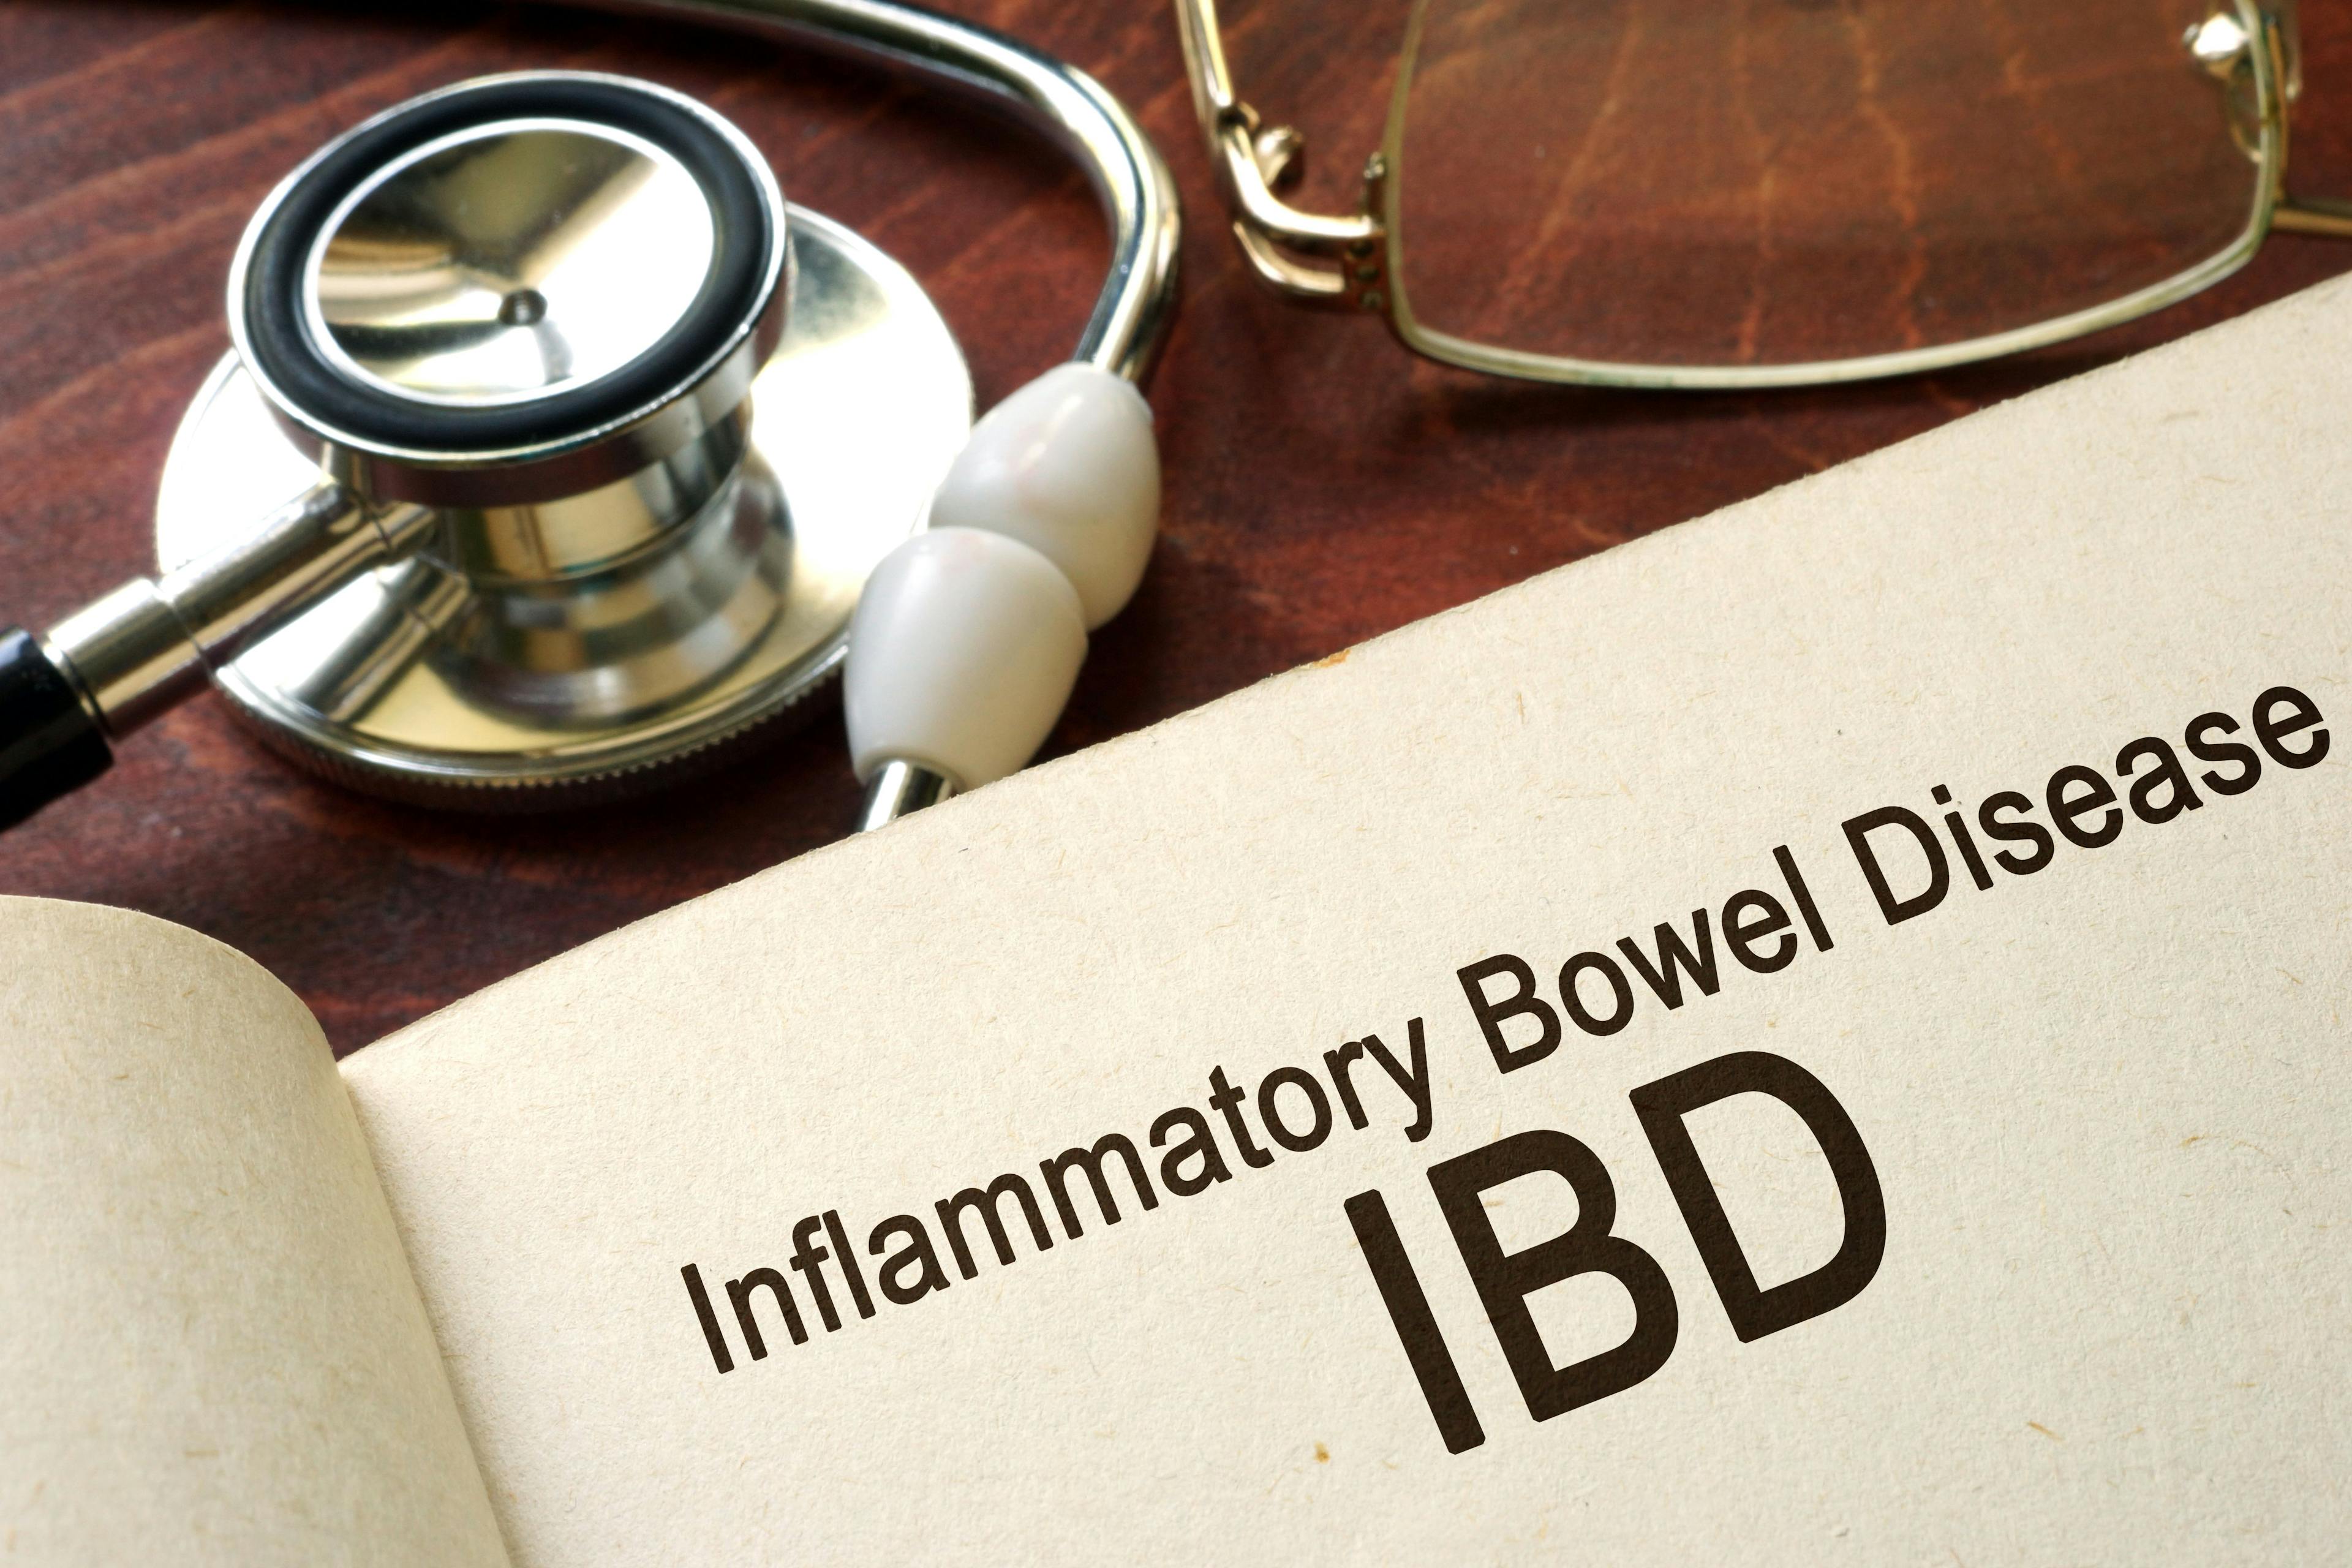 inflammatory bowel disease (IBD) written on a paper with a stethoscope | Image Credit: Vitalii Vodolazskyi - stock.adobe.com